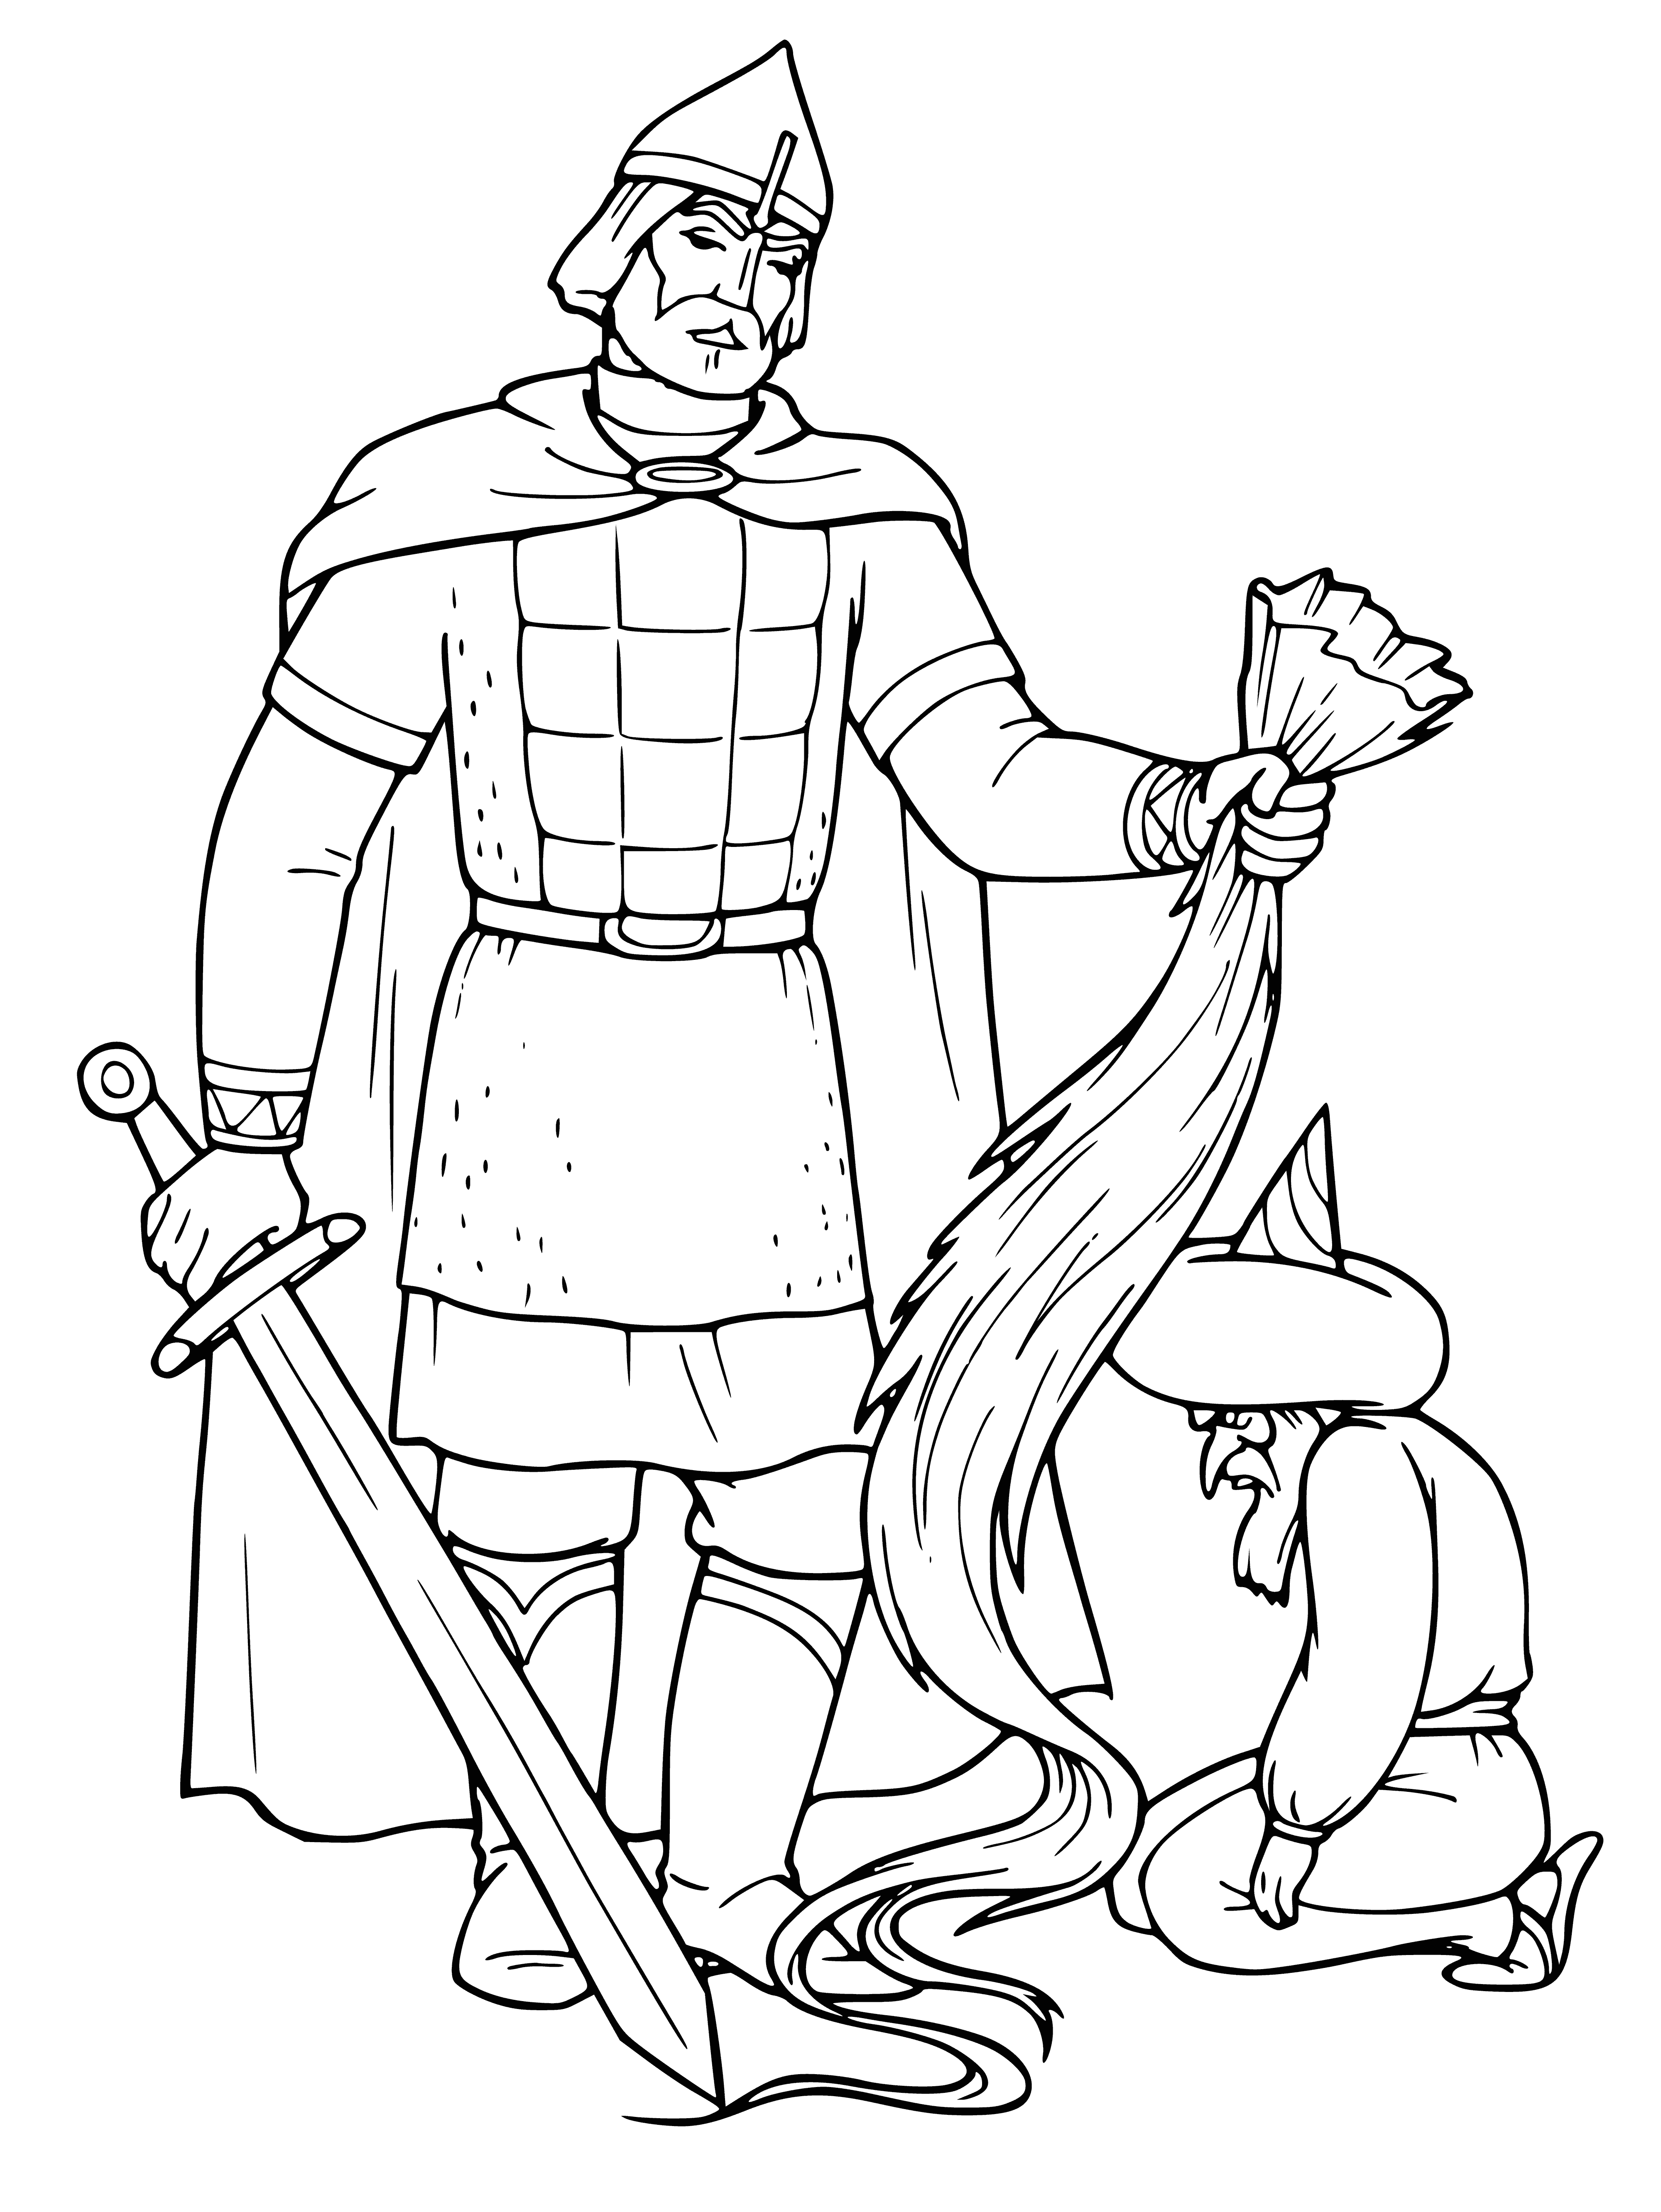 coloring page: Ivan Tsarevich cuts Chernomor's beard while he dreams in two Brothers Grimm tales.